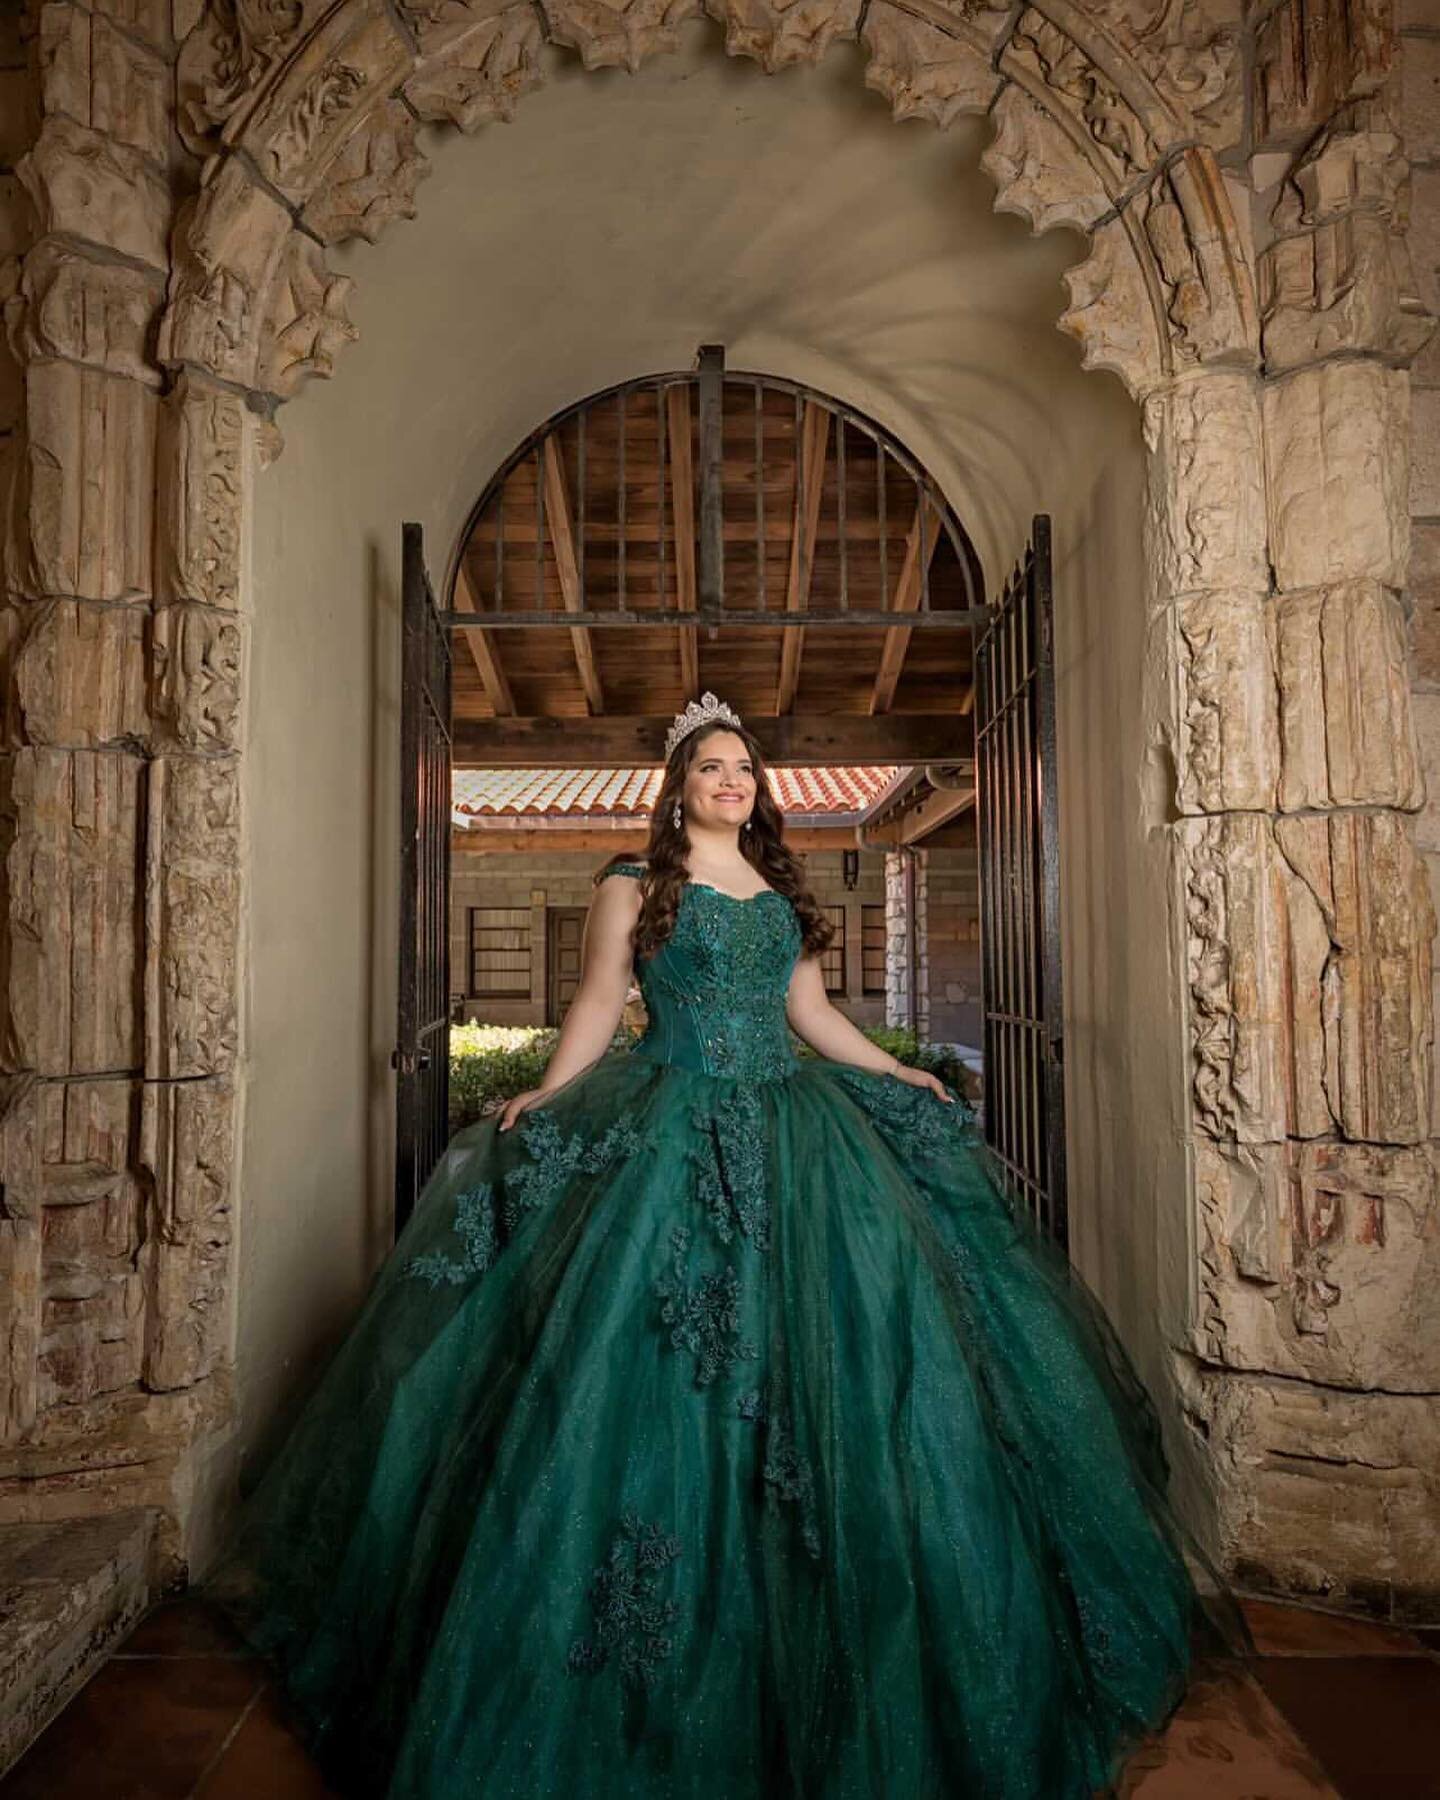 This beautiful quincea&ntilde;era in one of our gowns. Obsessed with this tone of green!! 
📸: @ineslynnphotography 
&bull;
&bull;
&bull;
&bull;

#quince#quinceañeramiami #quinceañera #quincedress #miami#miamidresses #miamidressrental#southflorida 